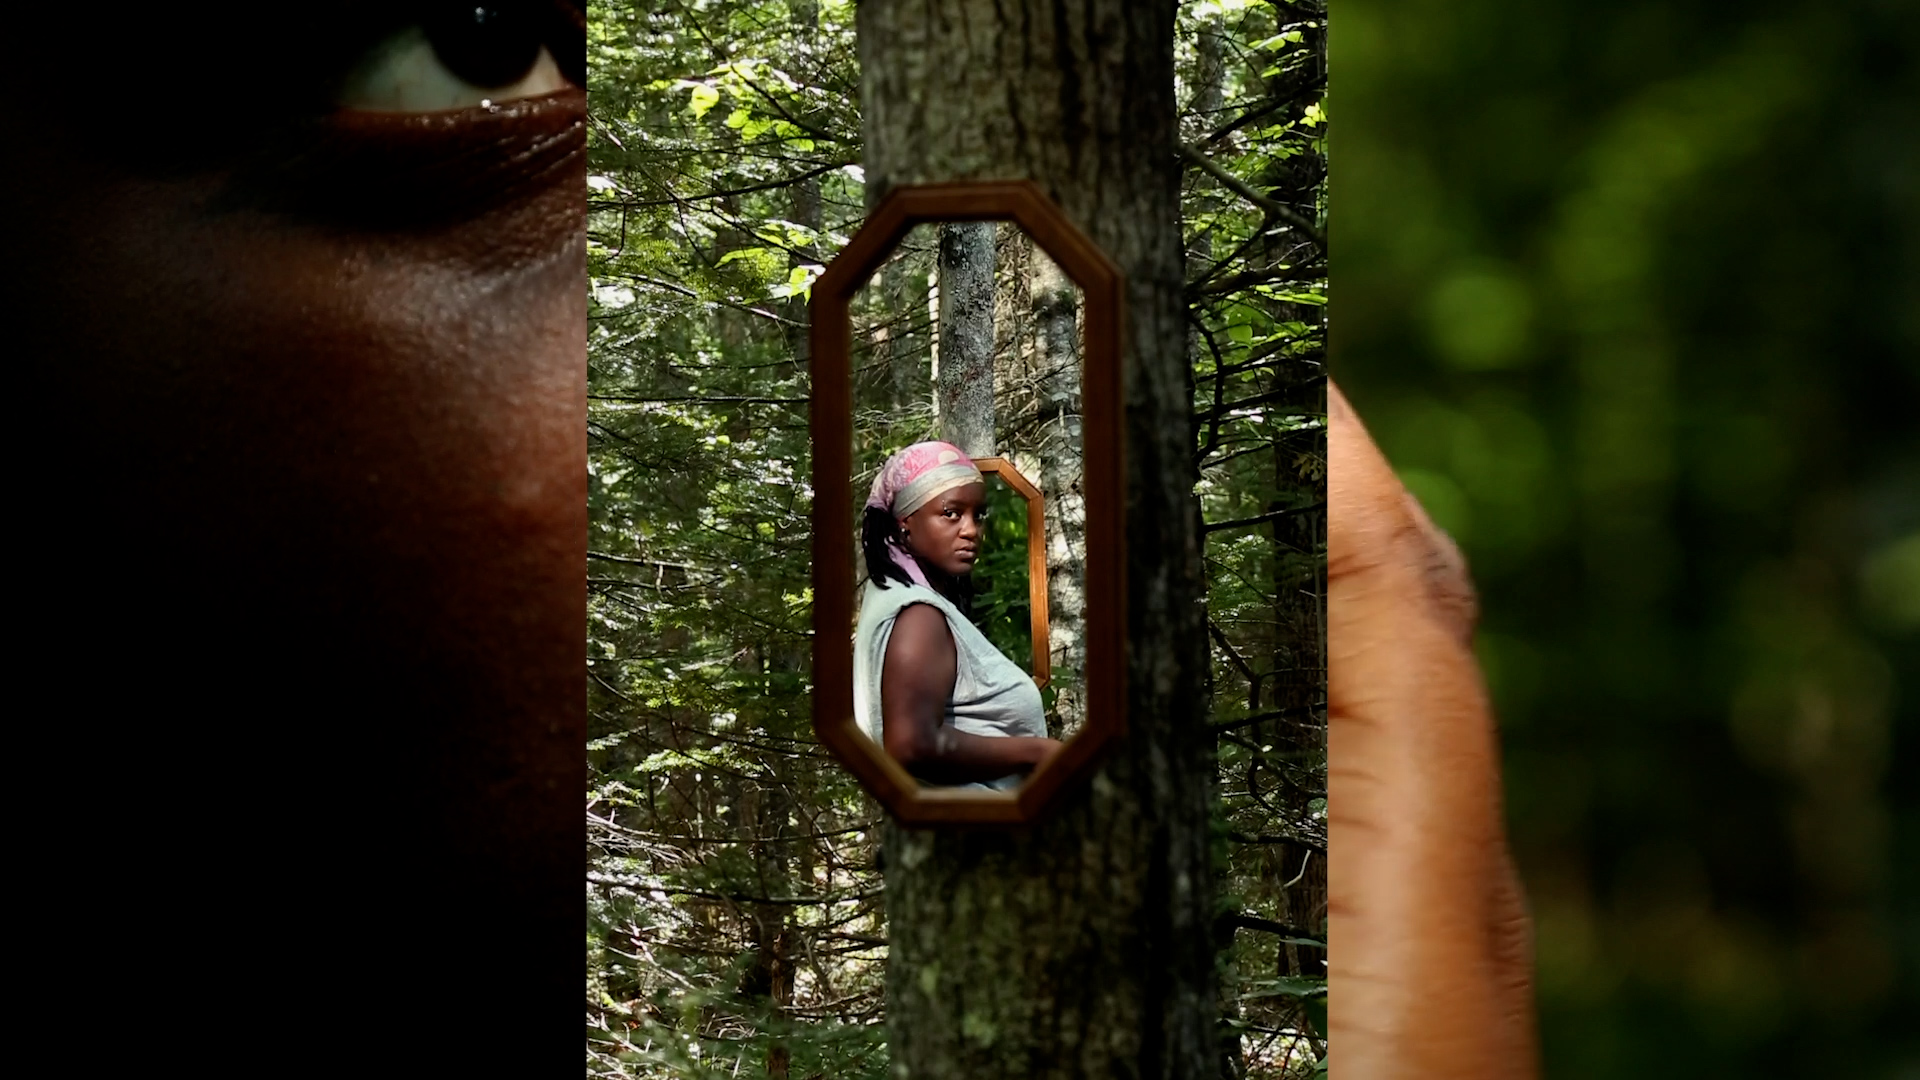 A brown skinned person in a silk bandana turns back to look directly at the camera in a forested area.